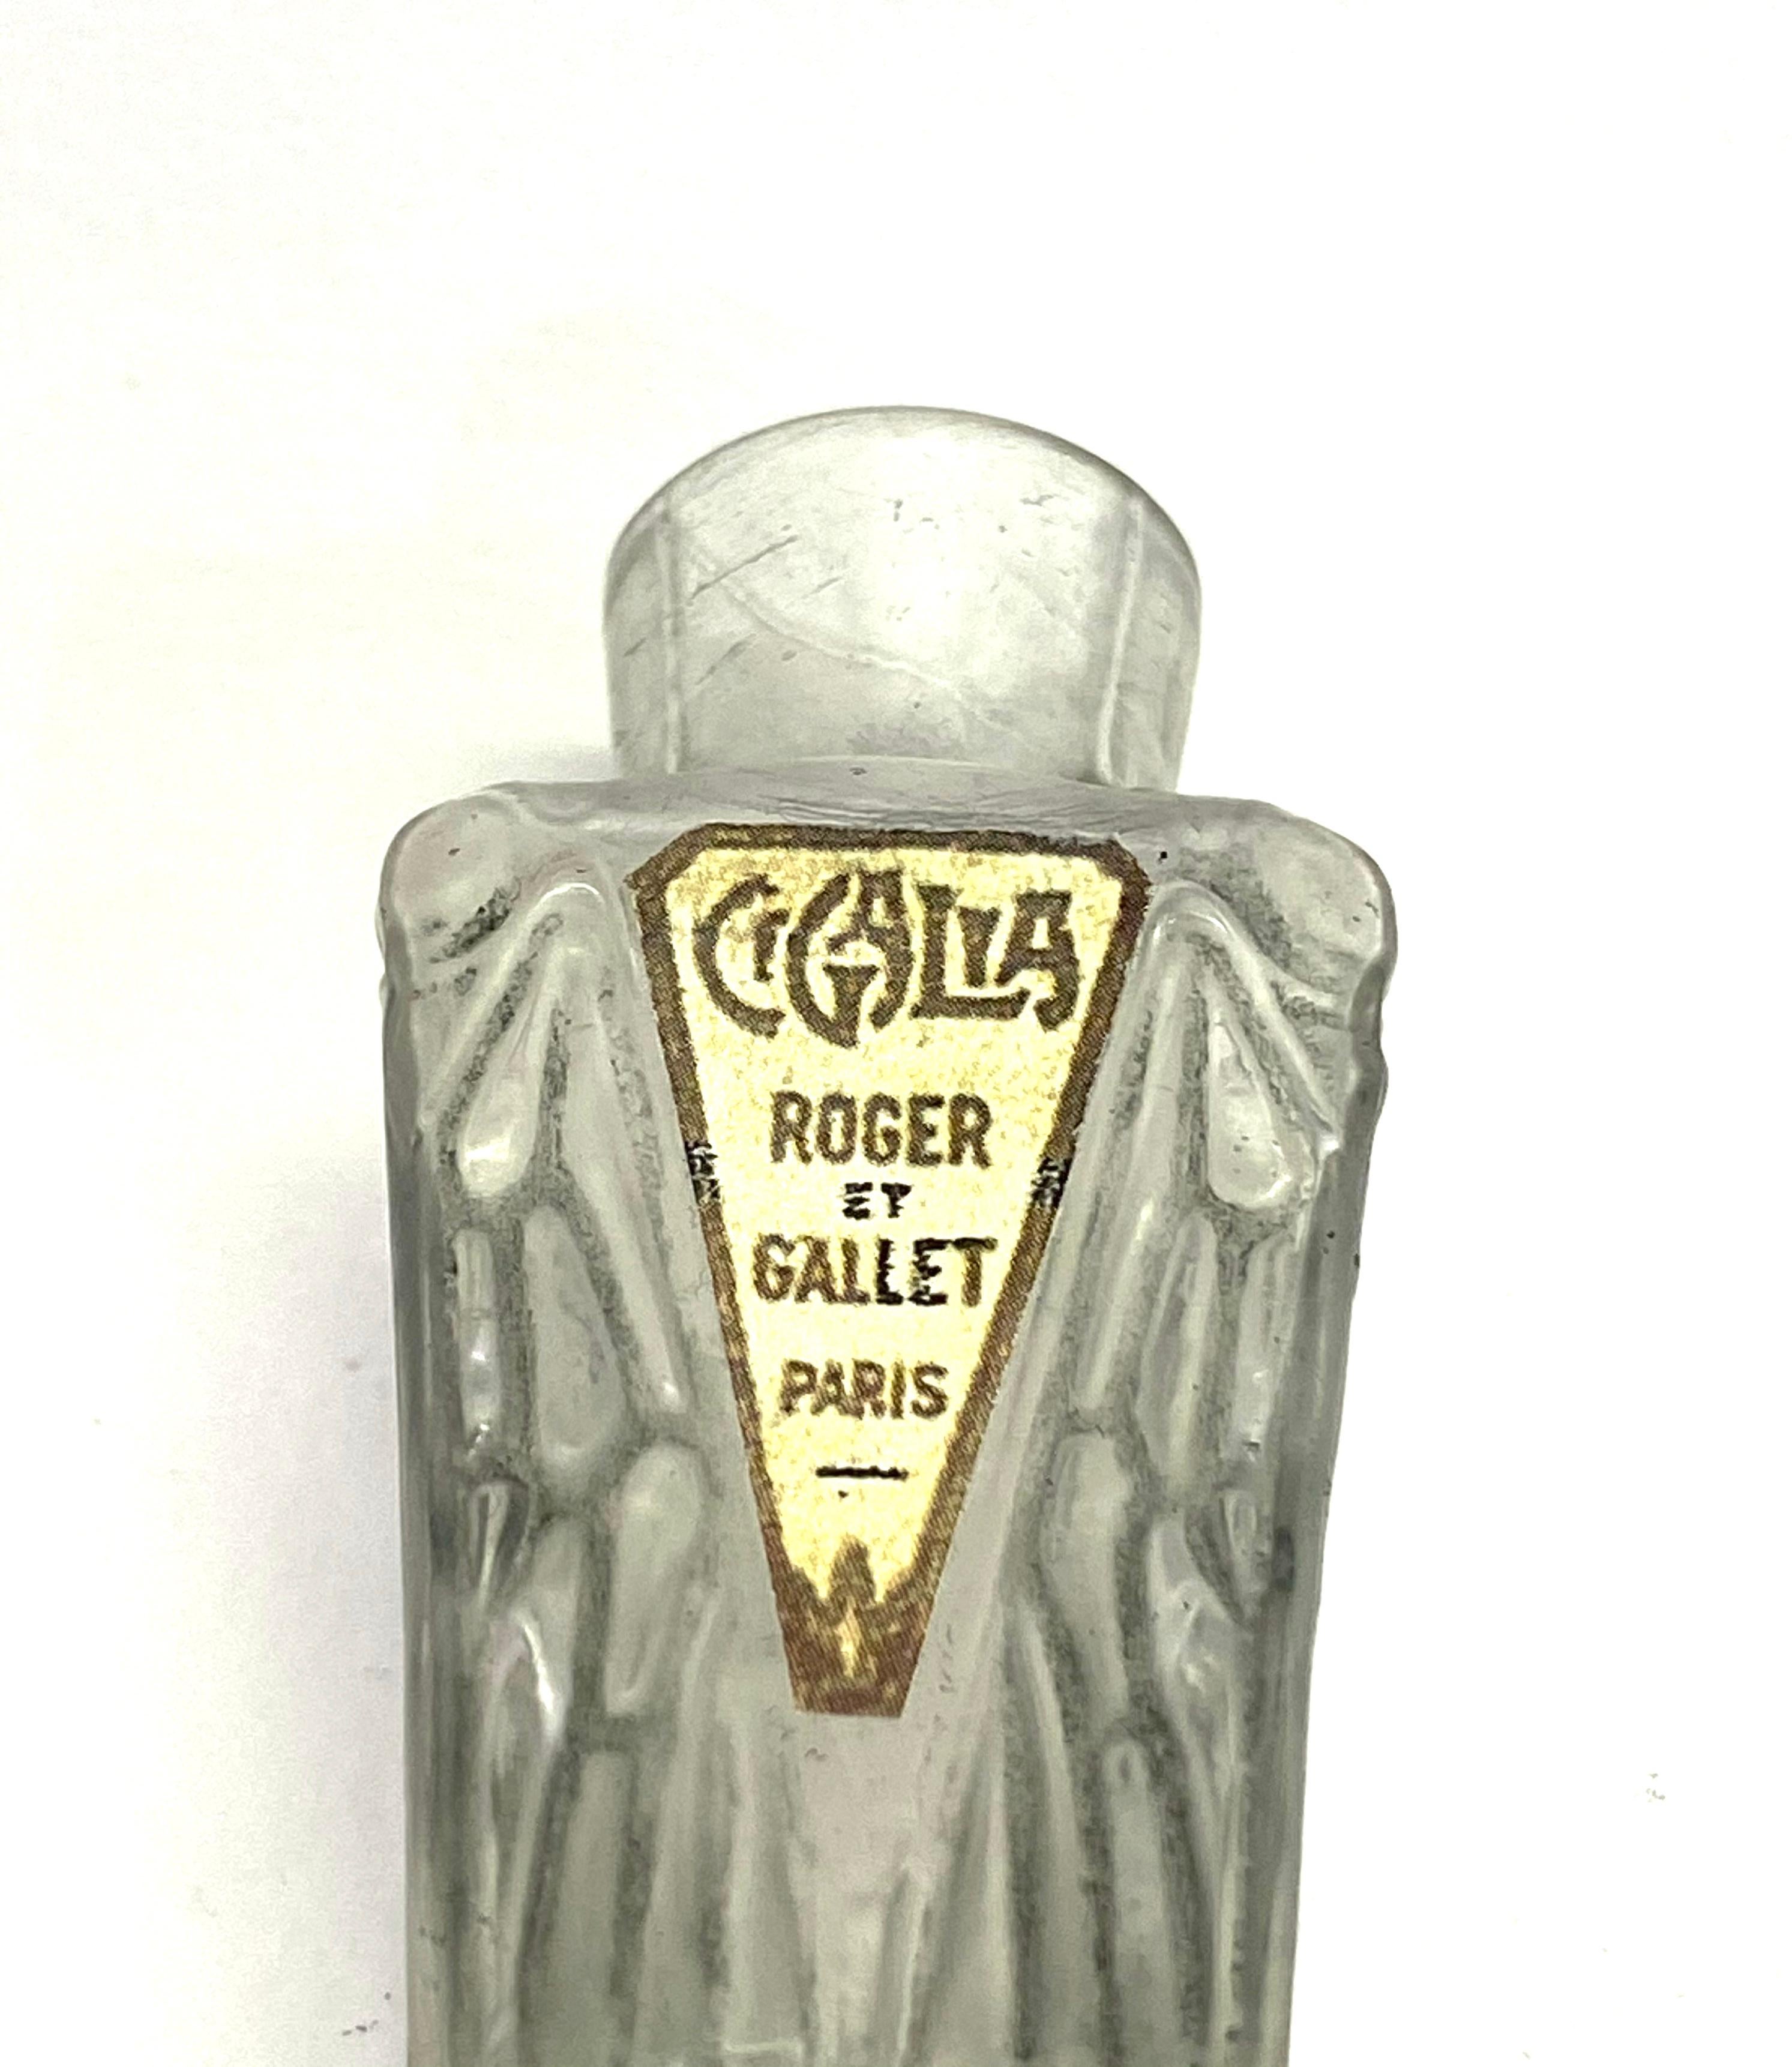 French 1924 Rene Lalique Cigalia Roger & Gallet Perfume Bottle Grey Stained Glass